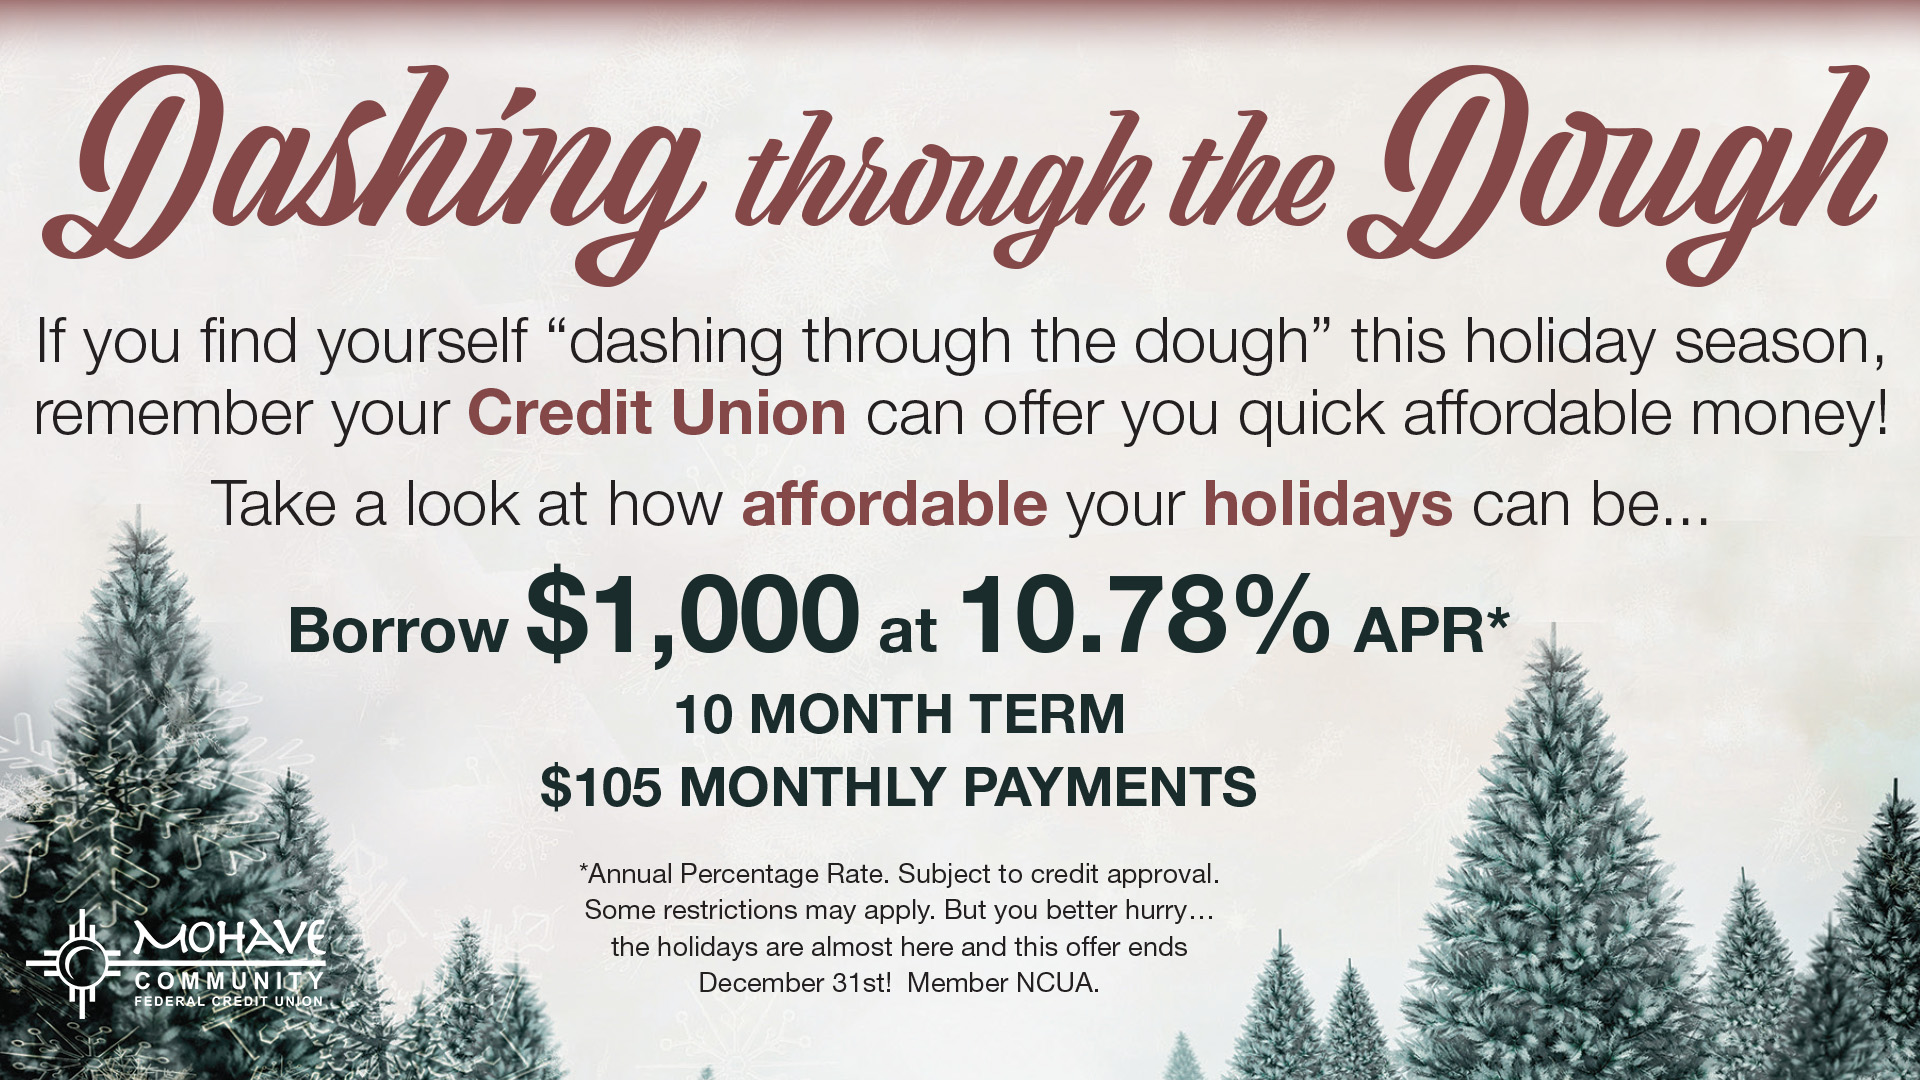 Now through December 31st we will be dashing through the dough! Call us at 928-753-8000 for more details in regards to this unsecured loan special!